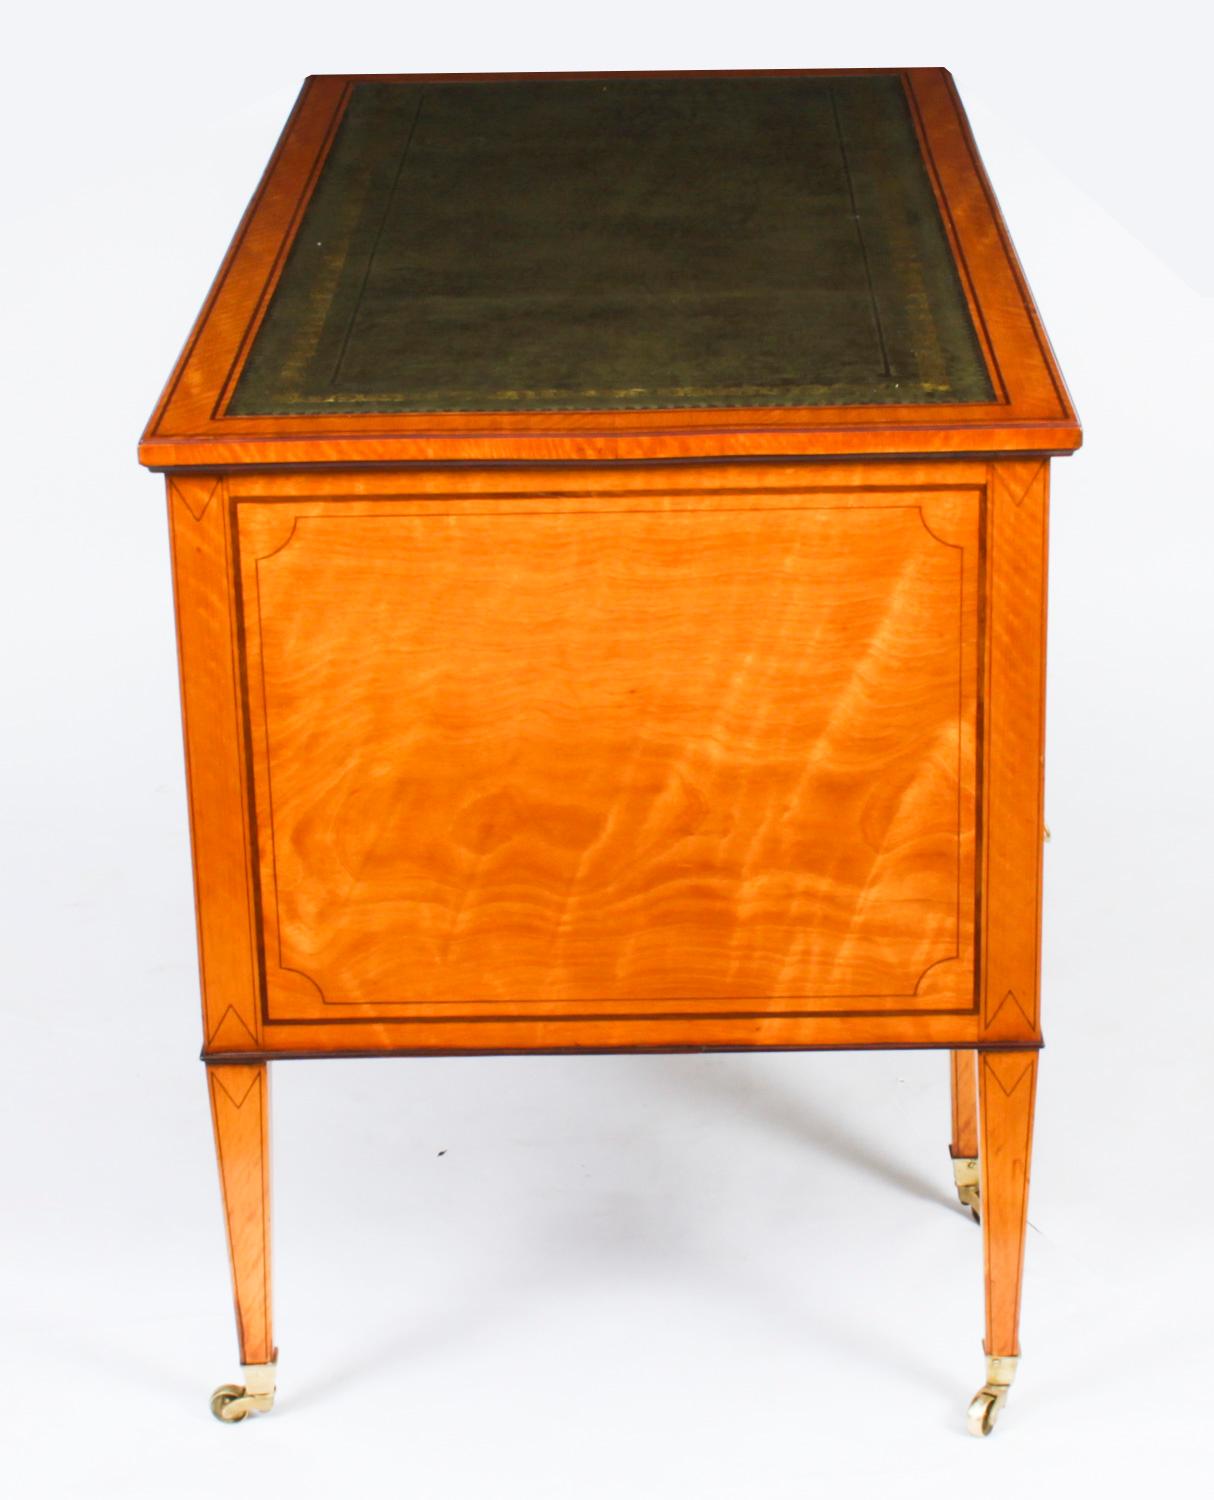 Antique Inlaid Satinwood Writing Table Desk by Edwards & Roberts, 19th Century For Sale 11